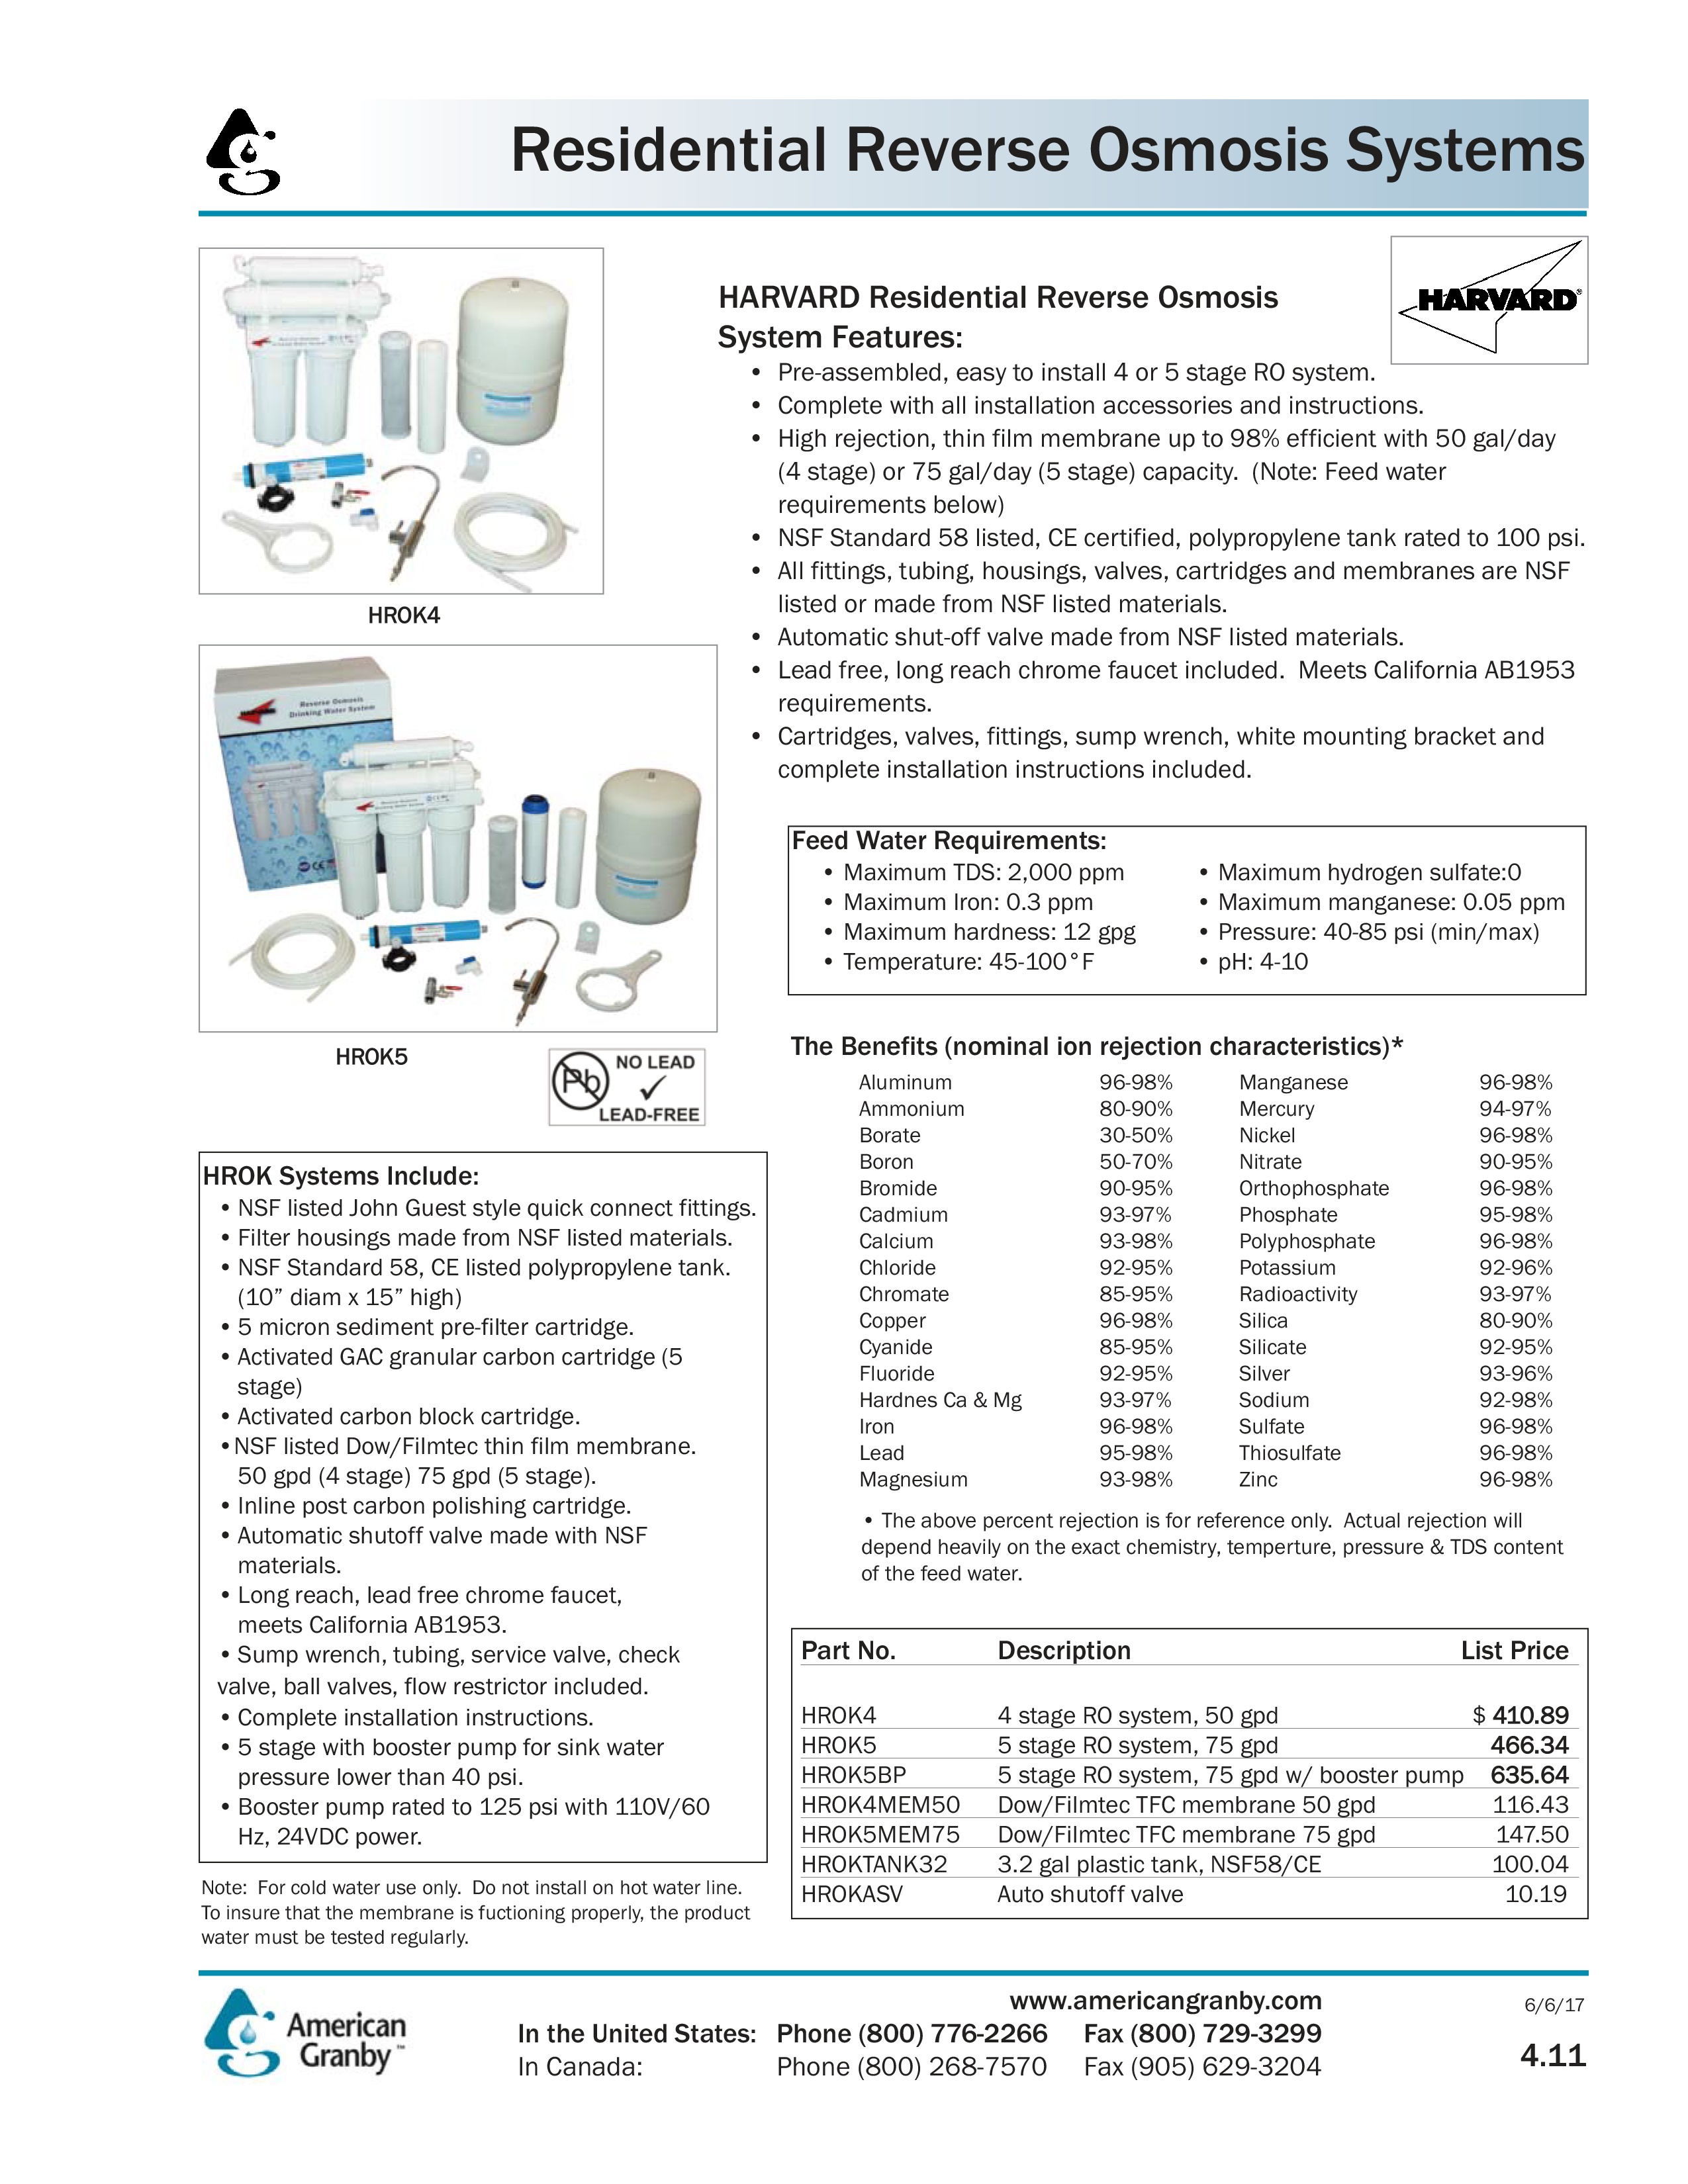 PDF explaining the 5 stages of reverse osmosis systems